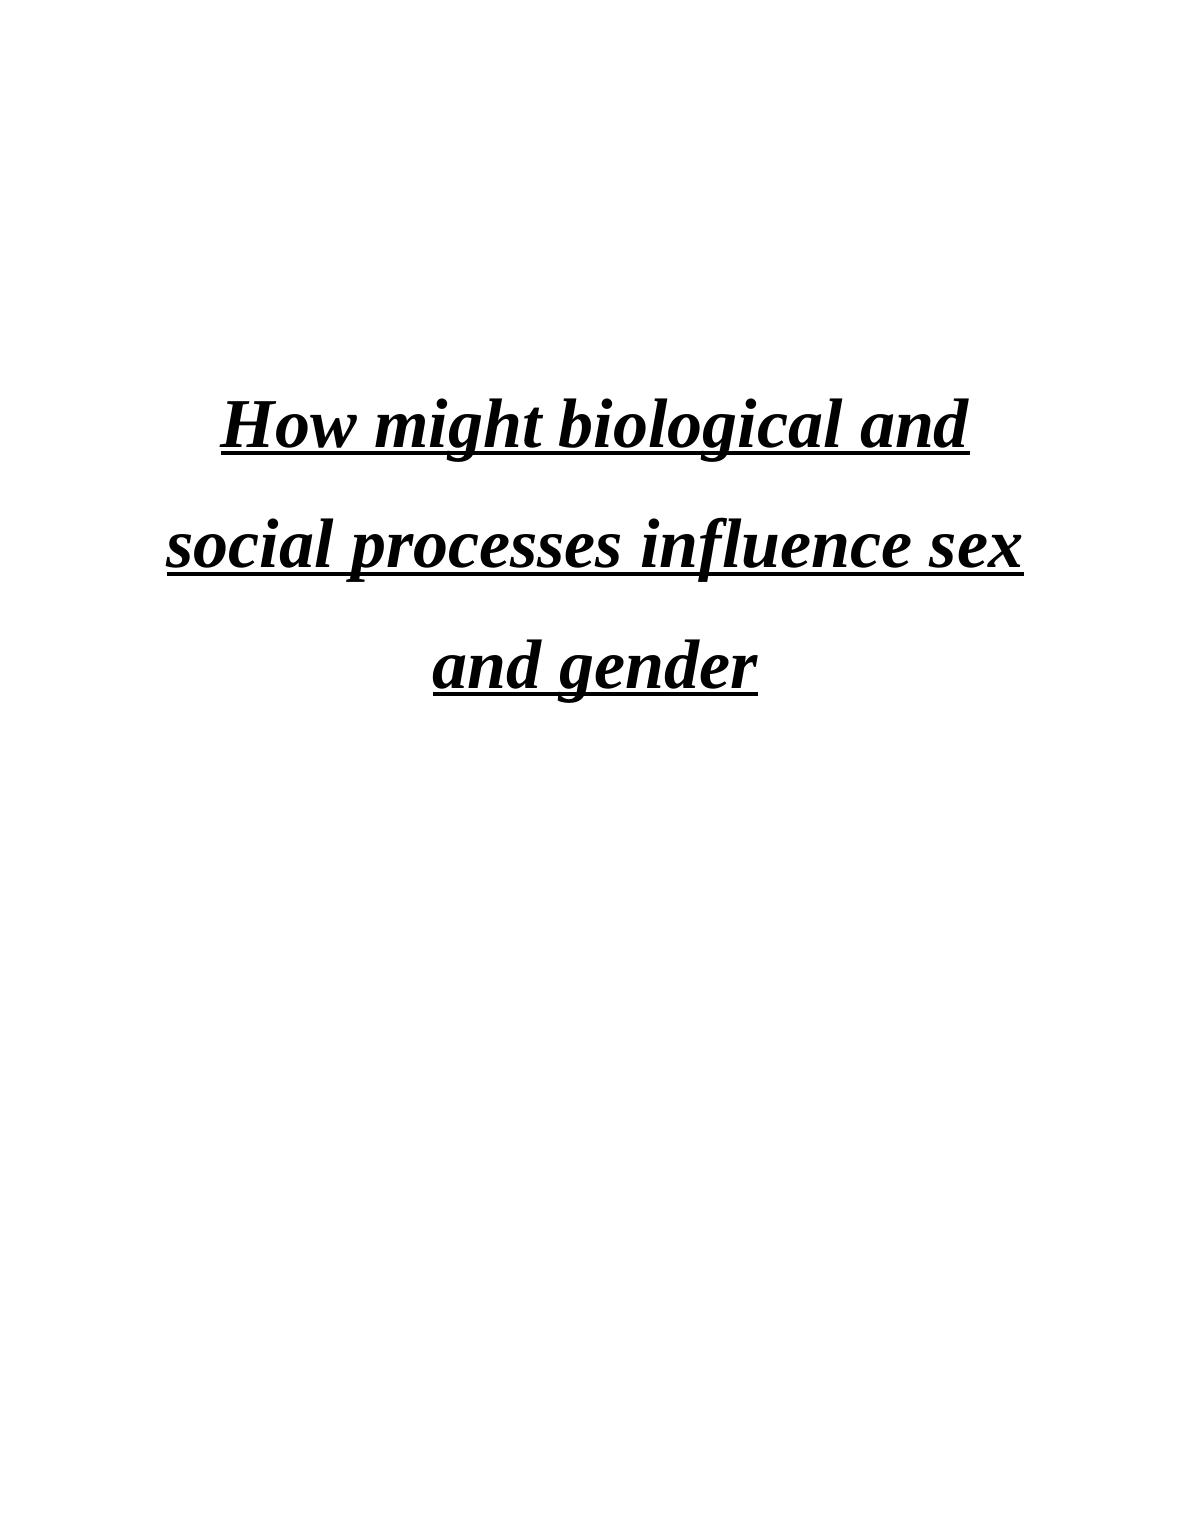 Influence of Biological and Social Processes on Sex and Gender_1